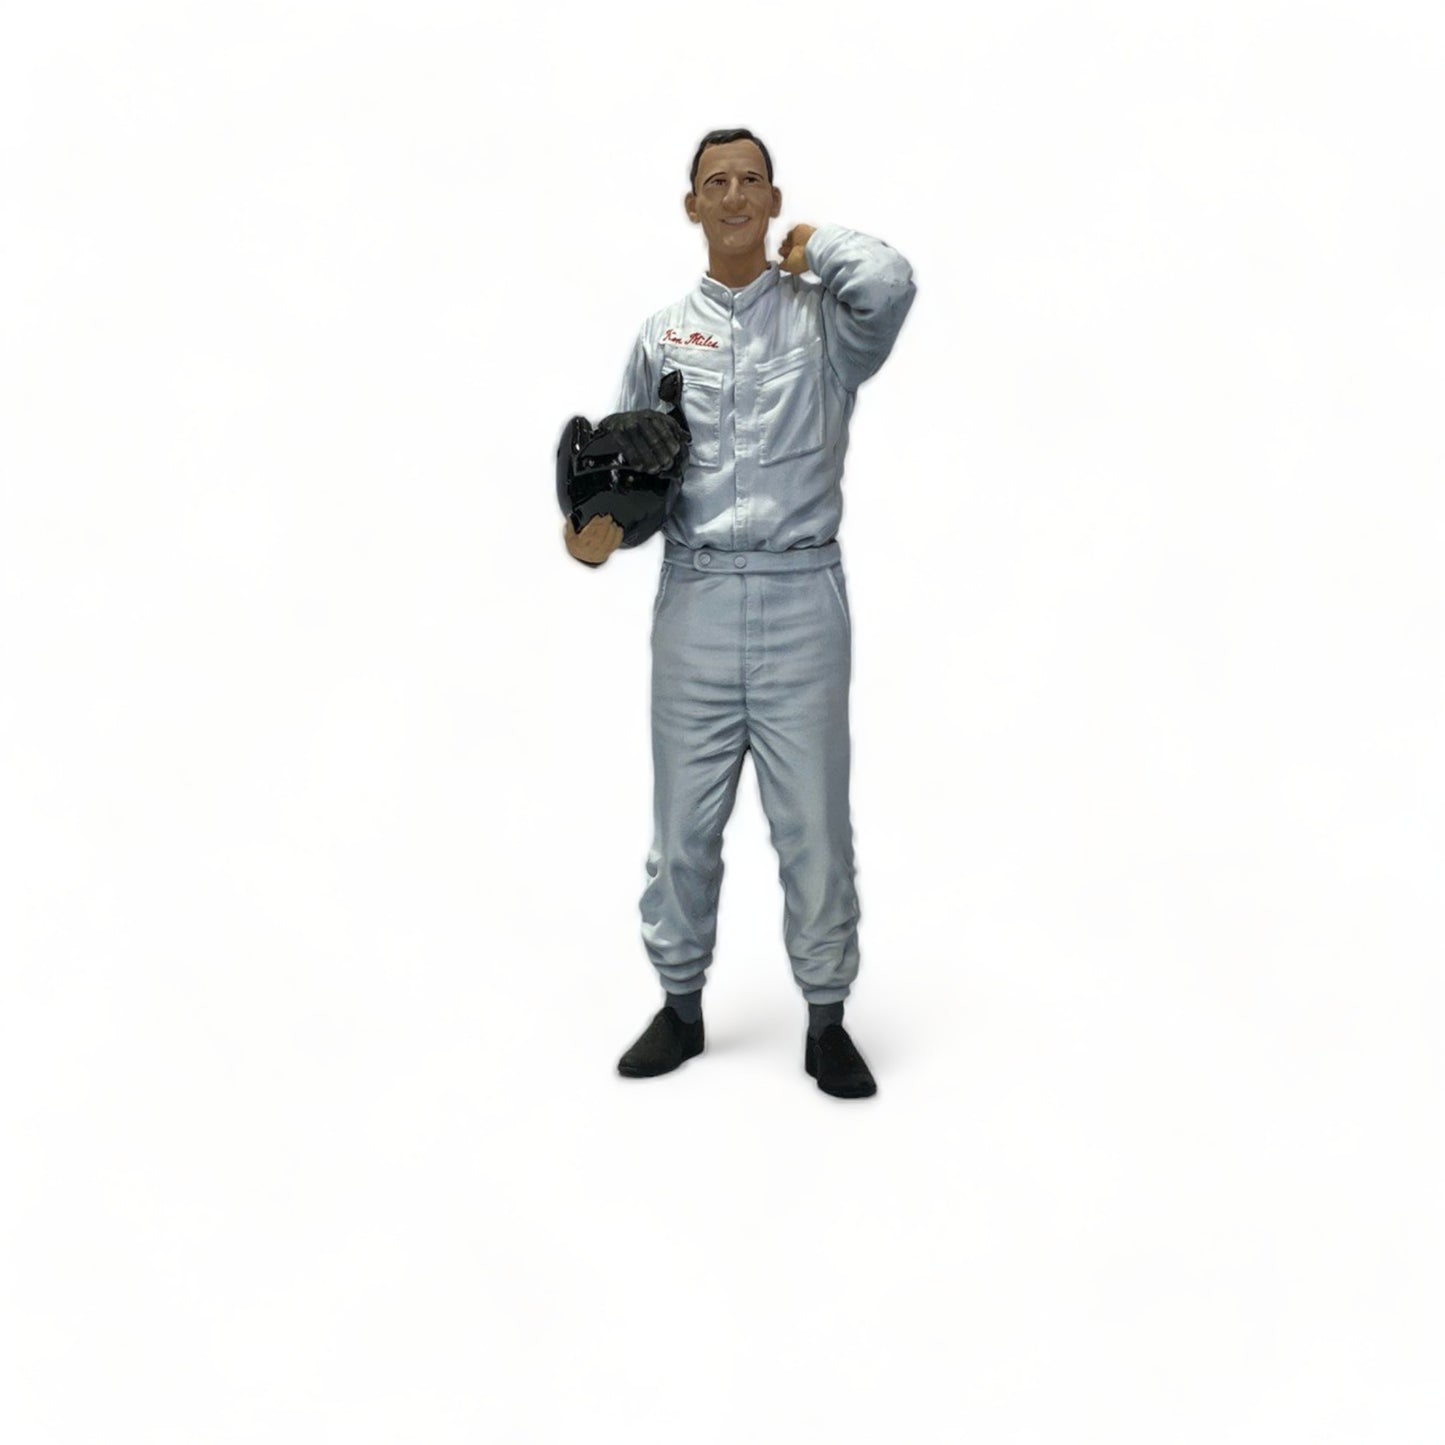 1/18 Action Figure - Ken Miles (Ford) by SF